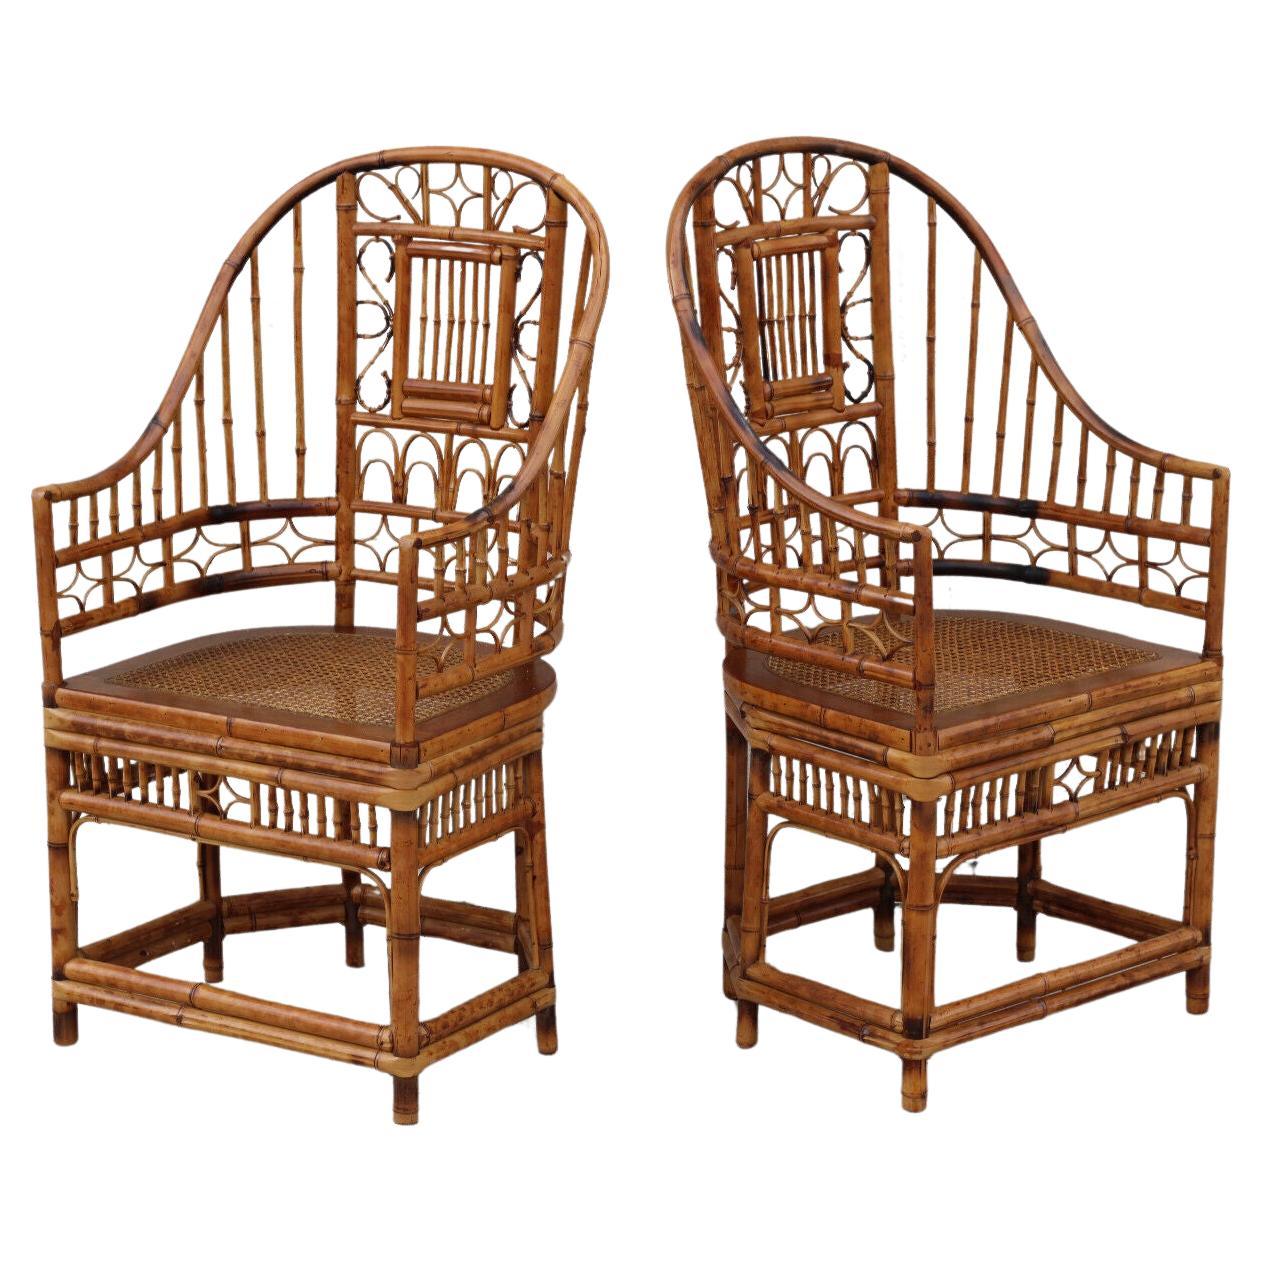 Chinese High Back Brighton Pavilion Style Burnt Bamboo Cane Armchairs, a Pair For Sale